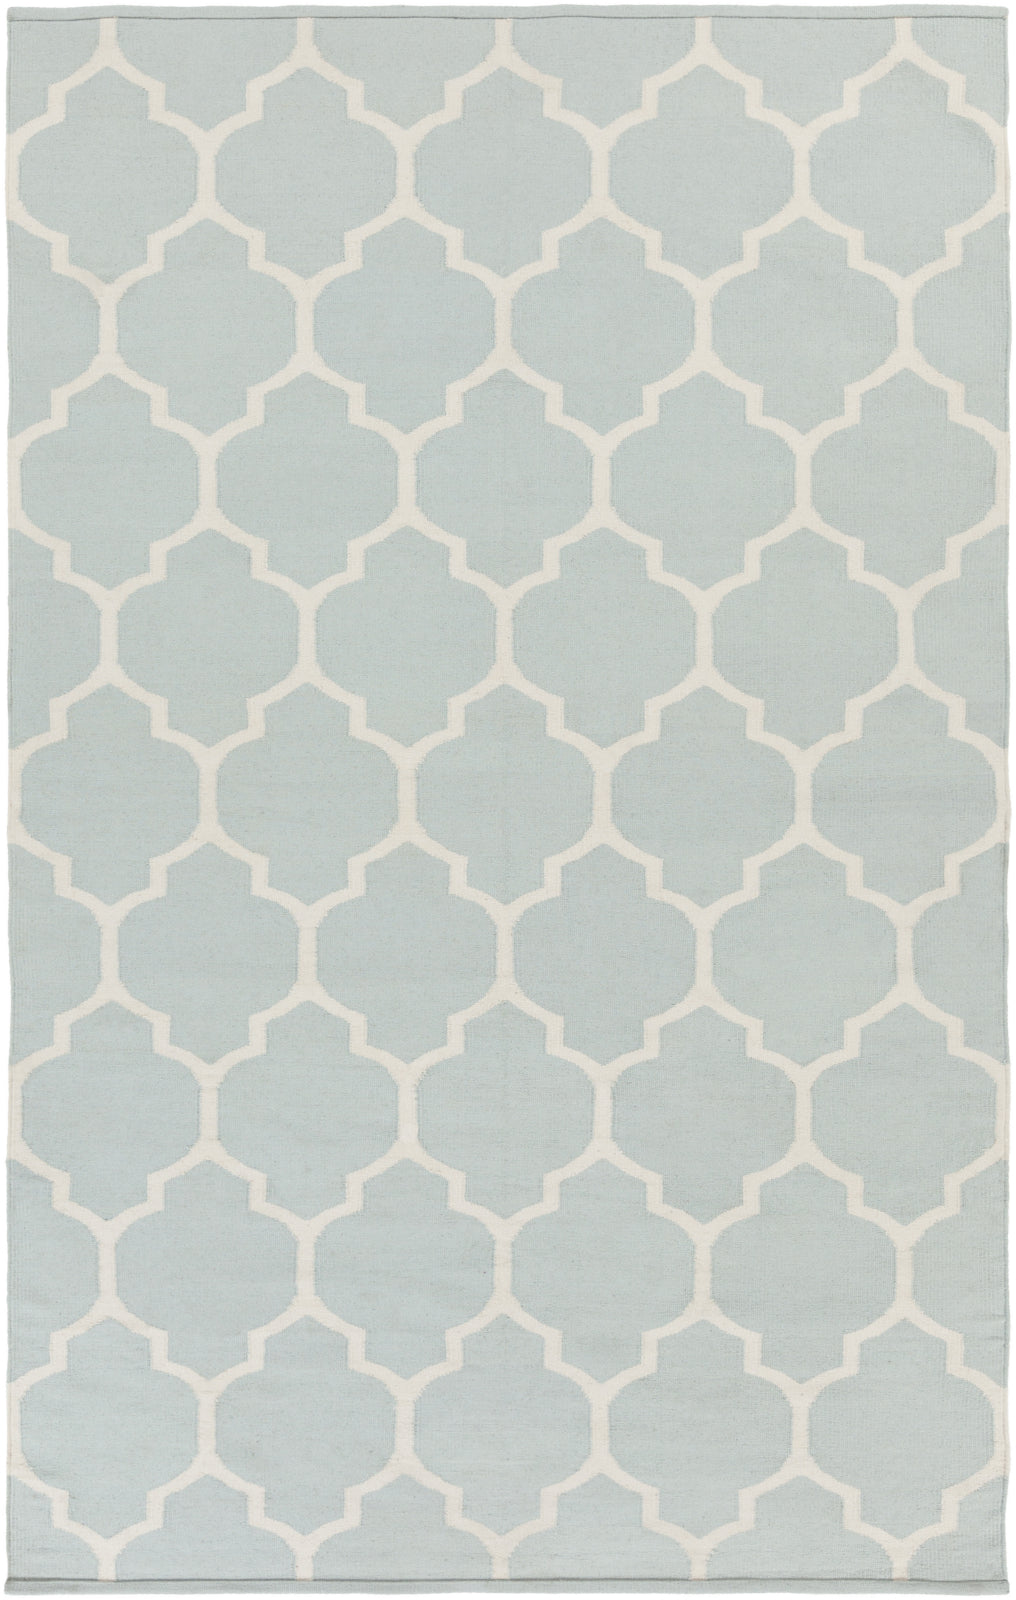 Artistic Weavers Vogue Claire AWLT3013 Area Rug main image